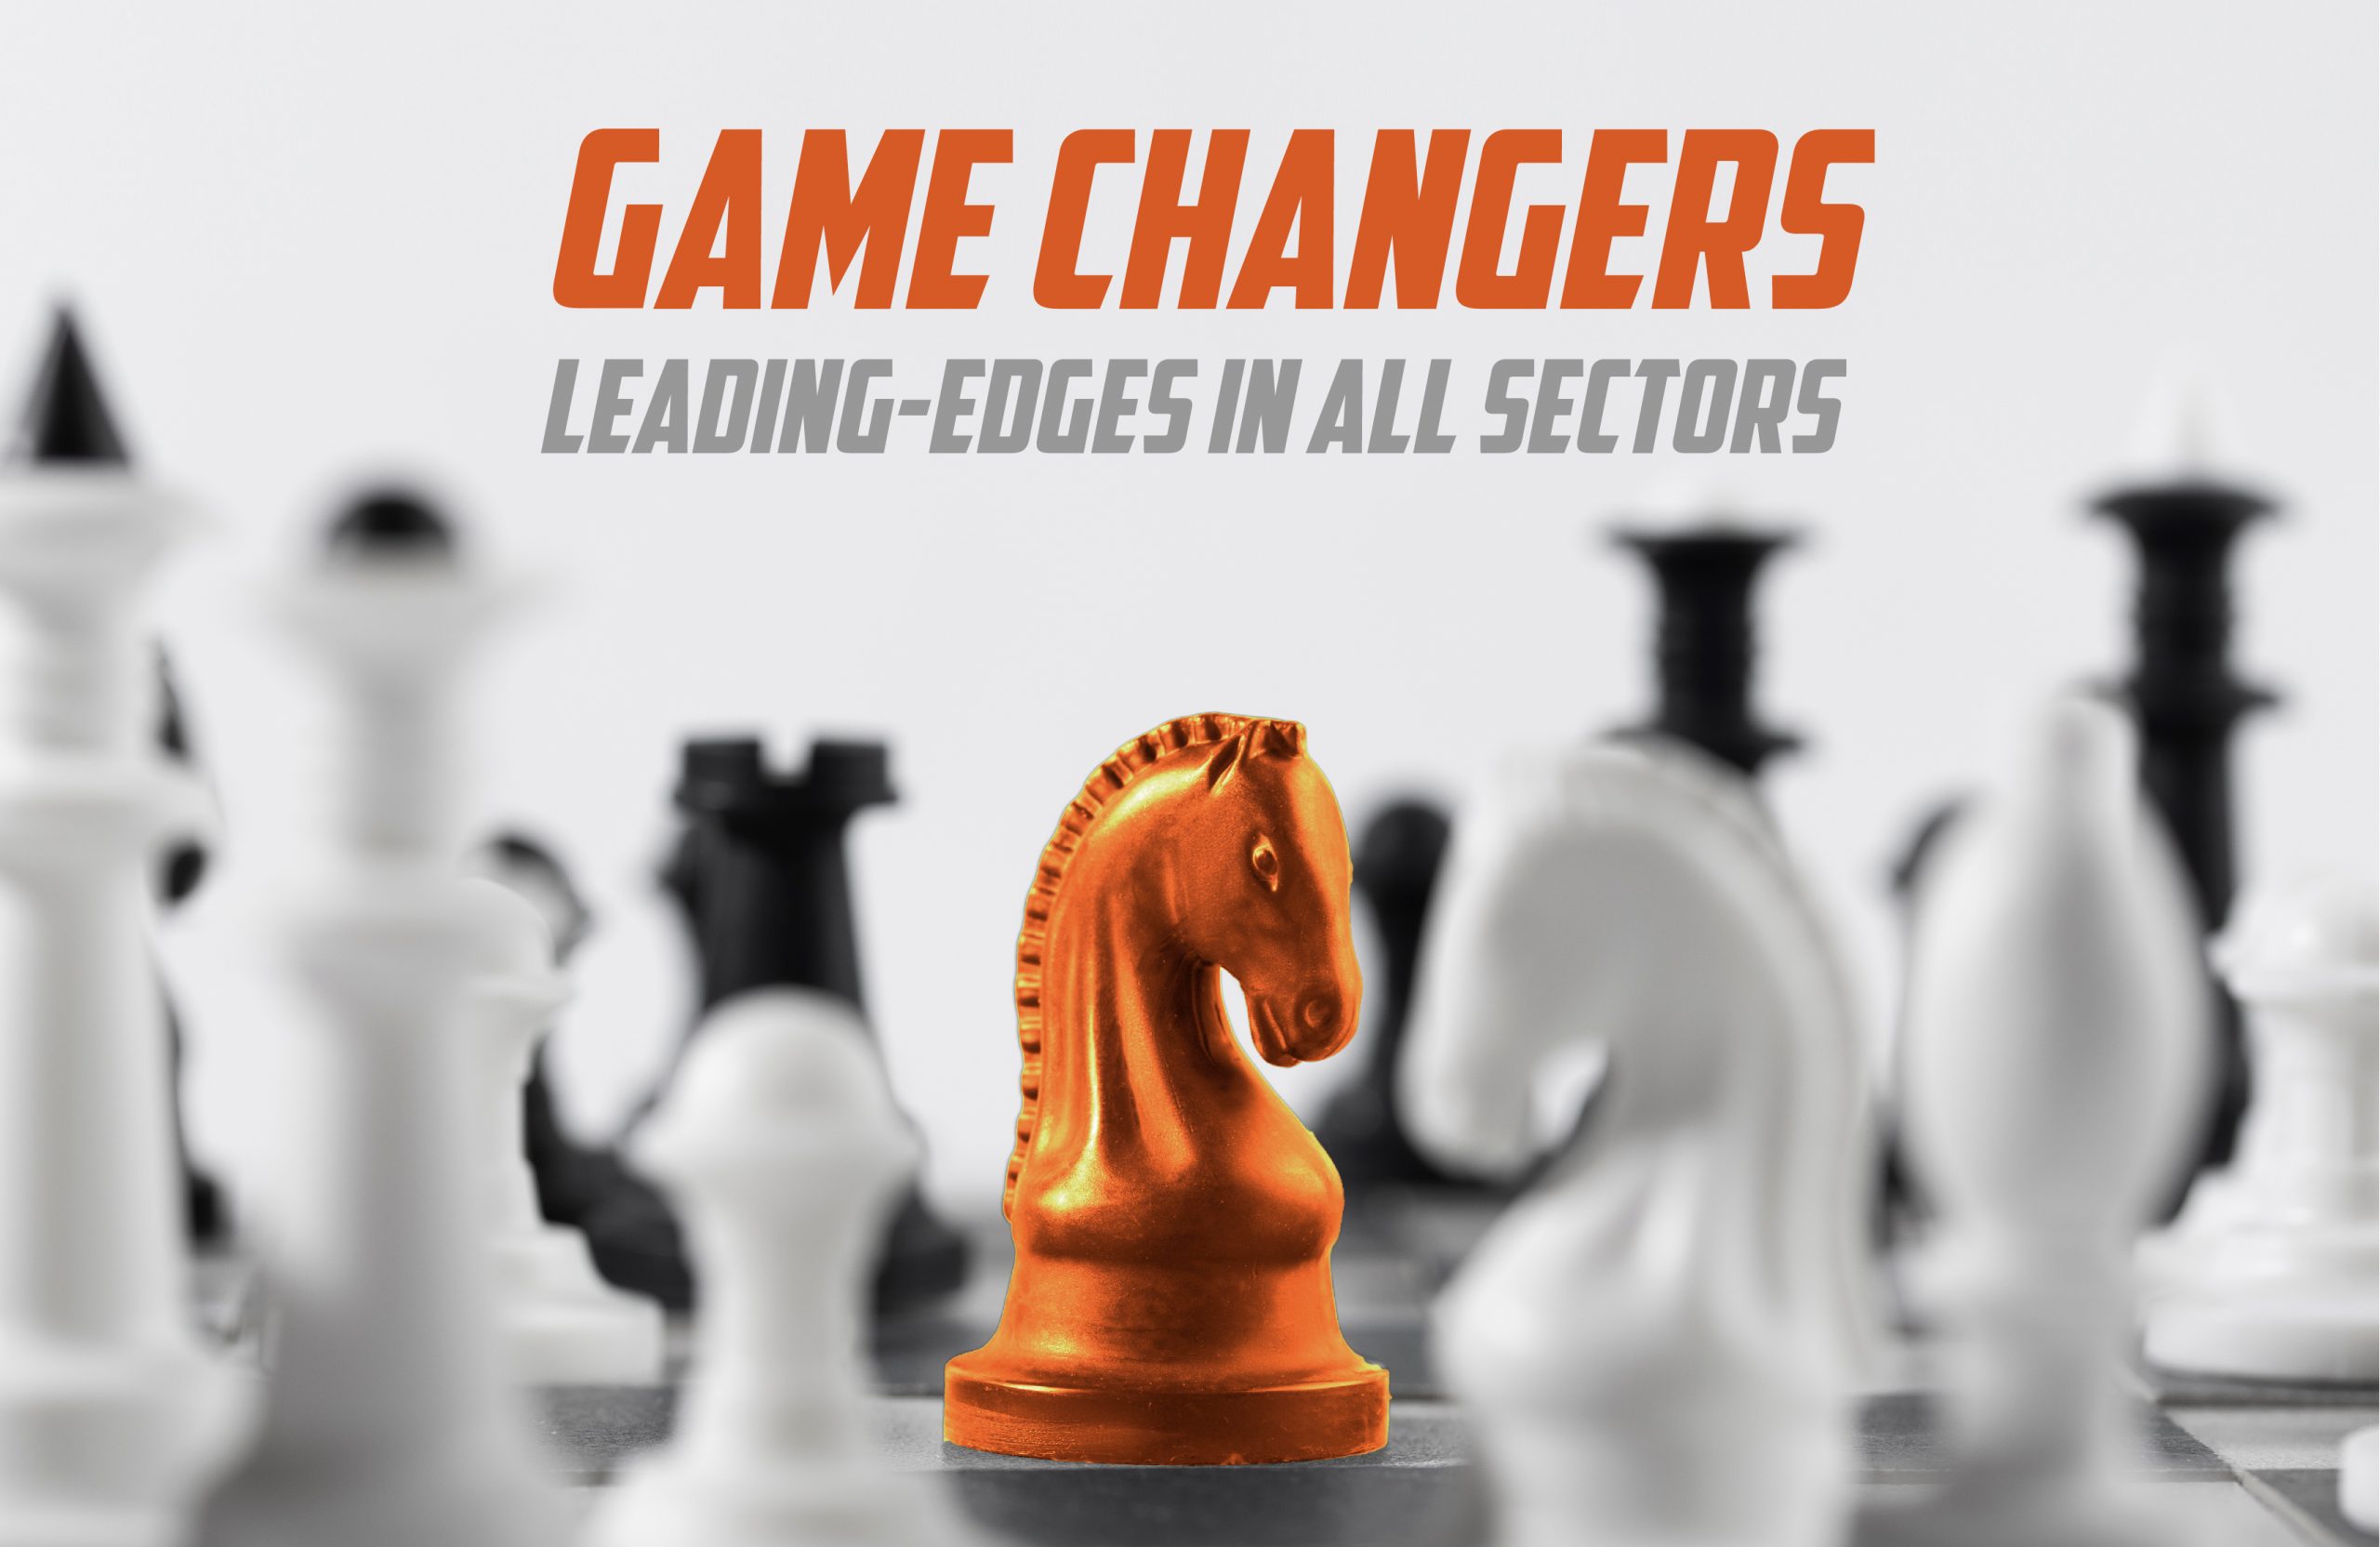 Innovative Game changers: Leading-Edges in All Sectors